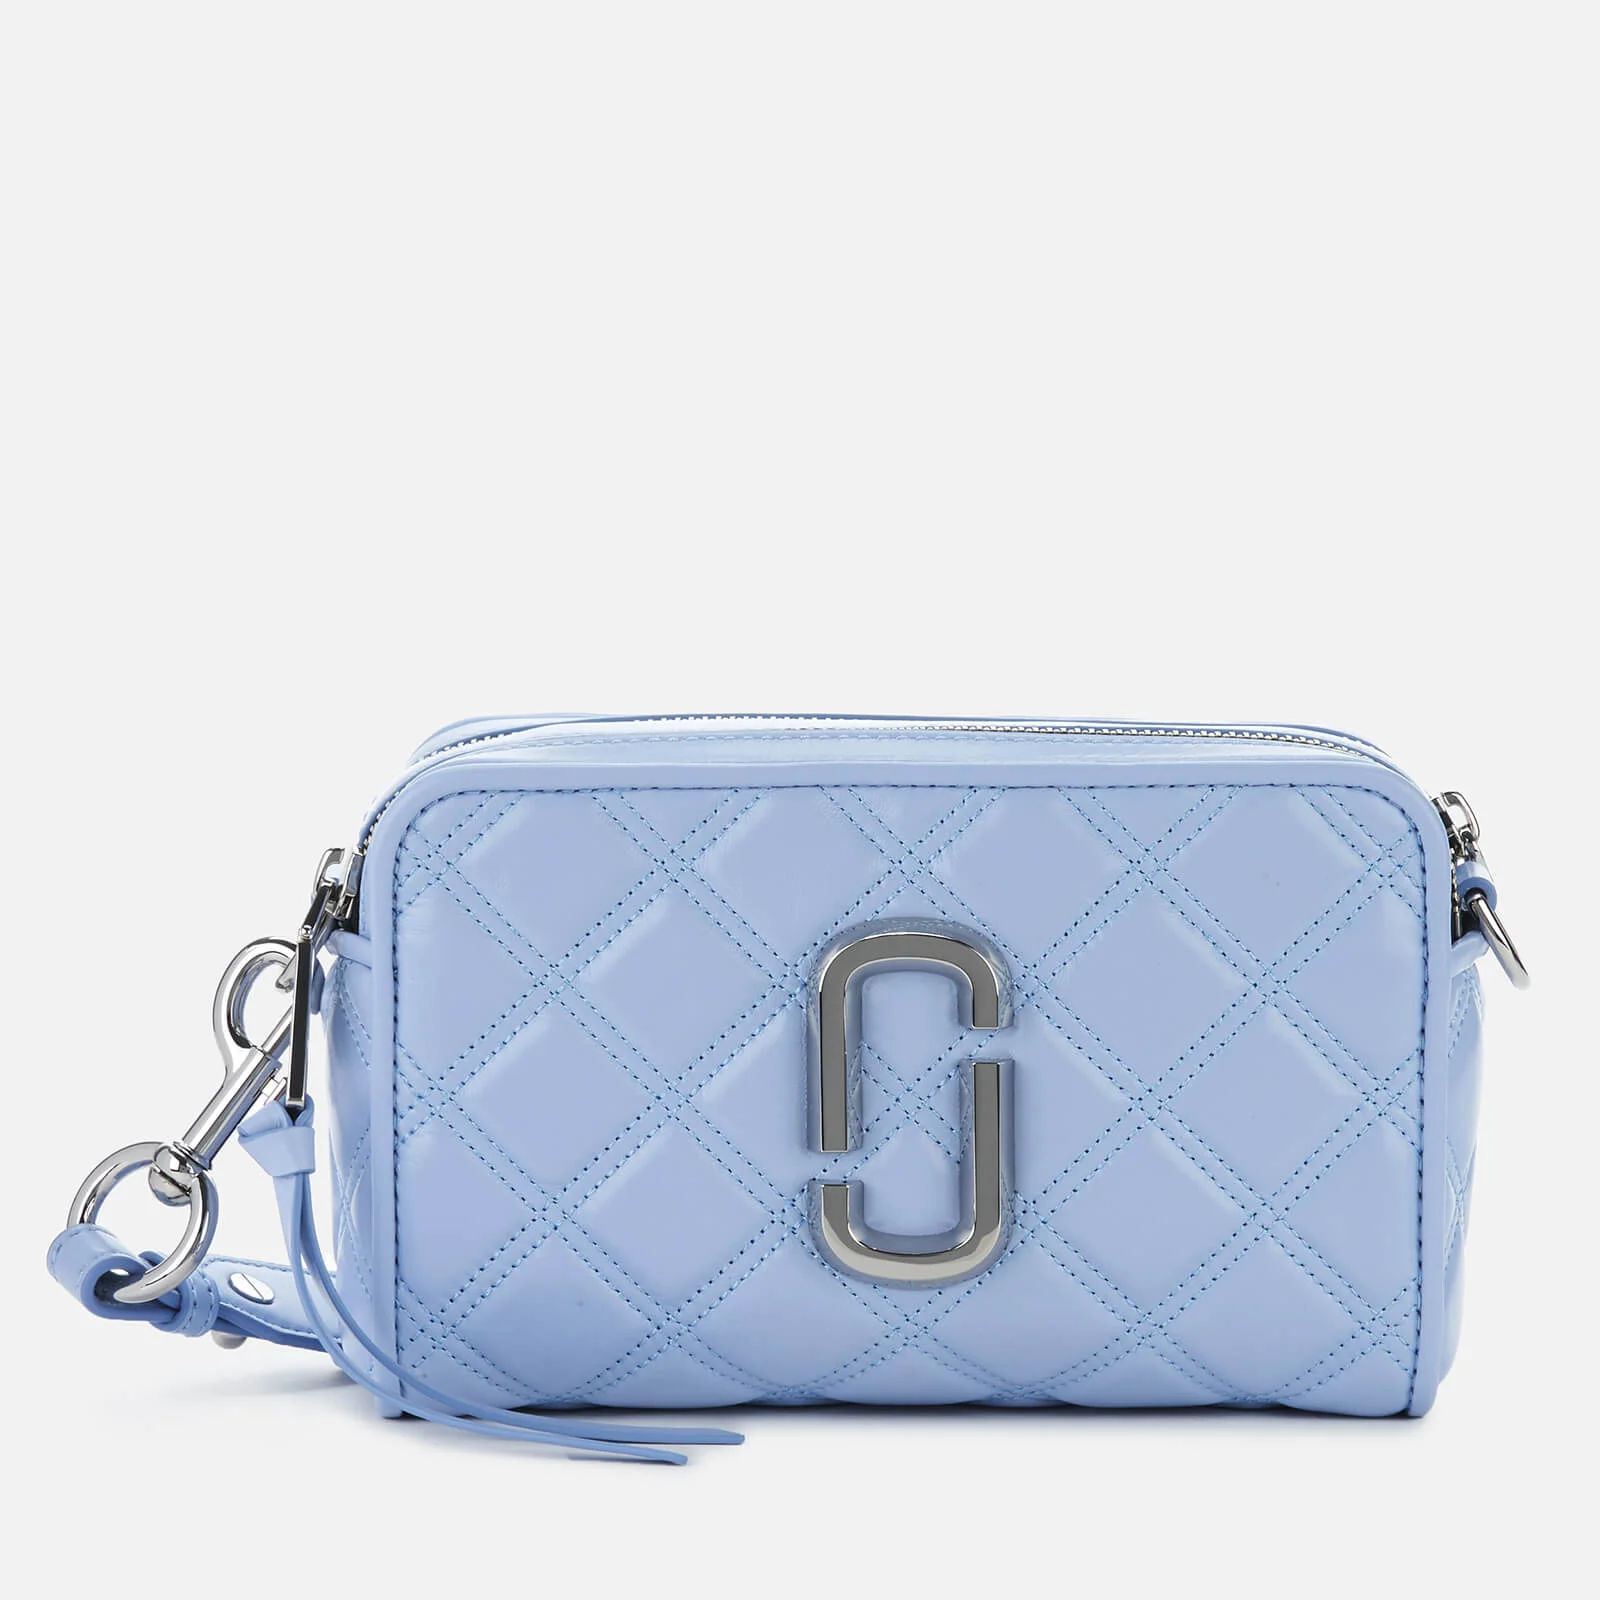 Marc Jacobs Women's The Softshot 21 Quilted - Blue Mist Image 1